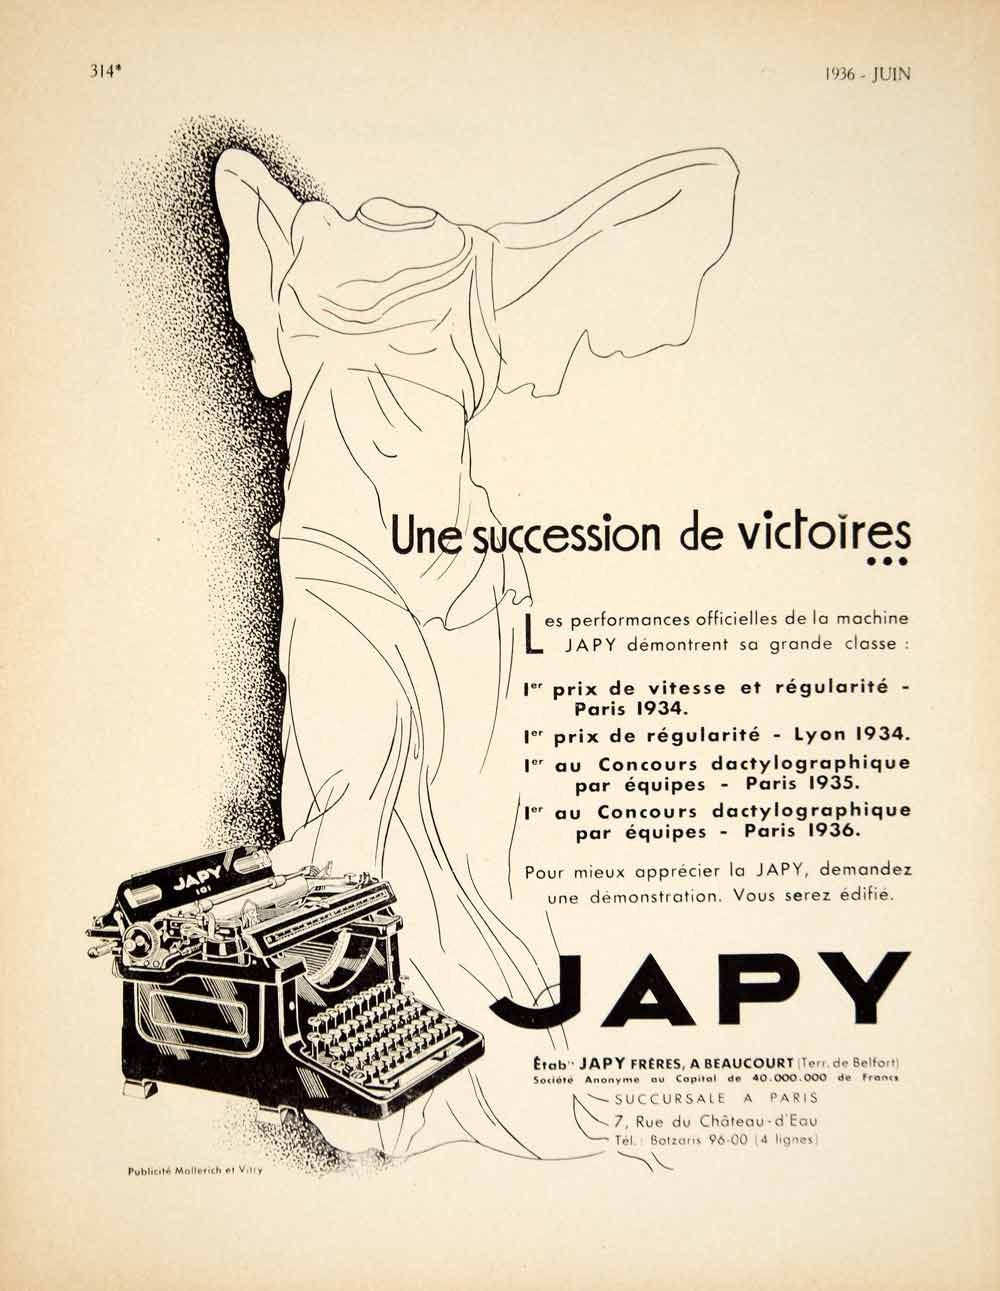 1936 Ad Vintage French Japy 101 Typewriter Typing Winged Victory Statue VEN9 - Period Paper
